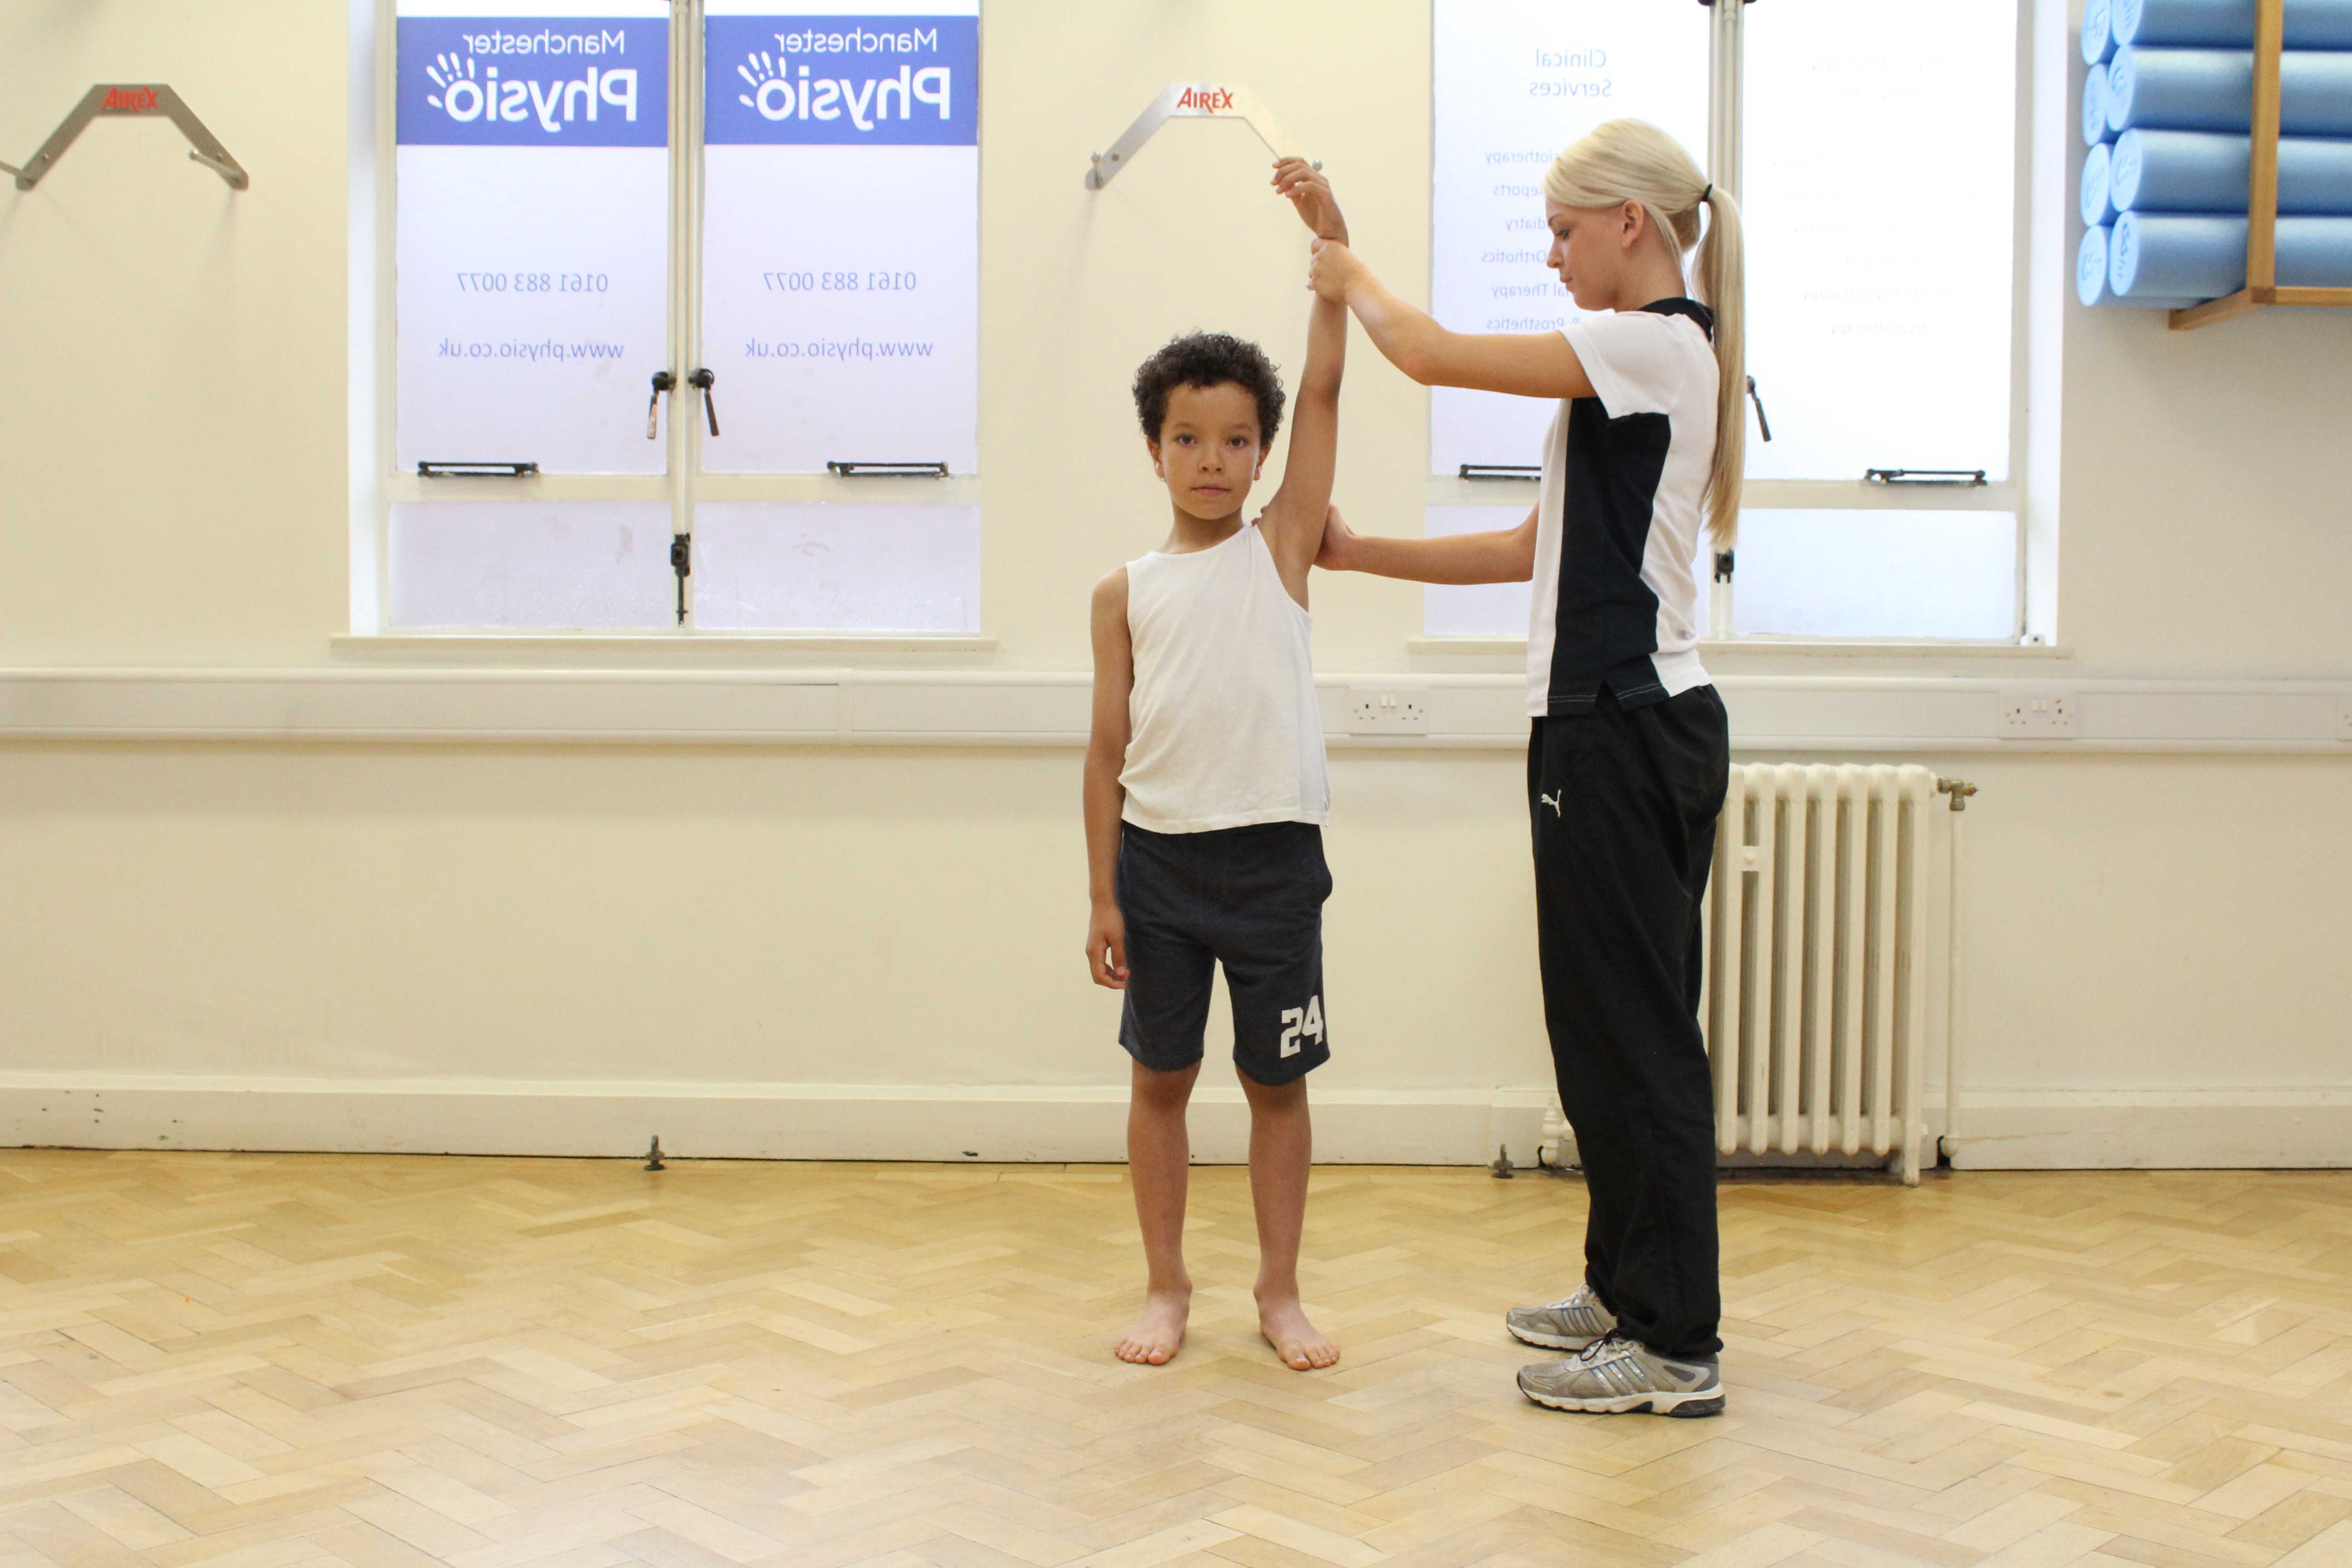 stability and toning exercises supervised by a paediatric physiotherapist